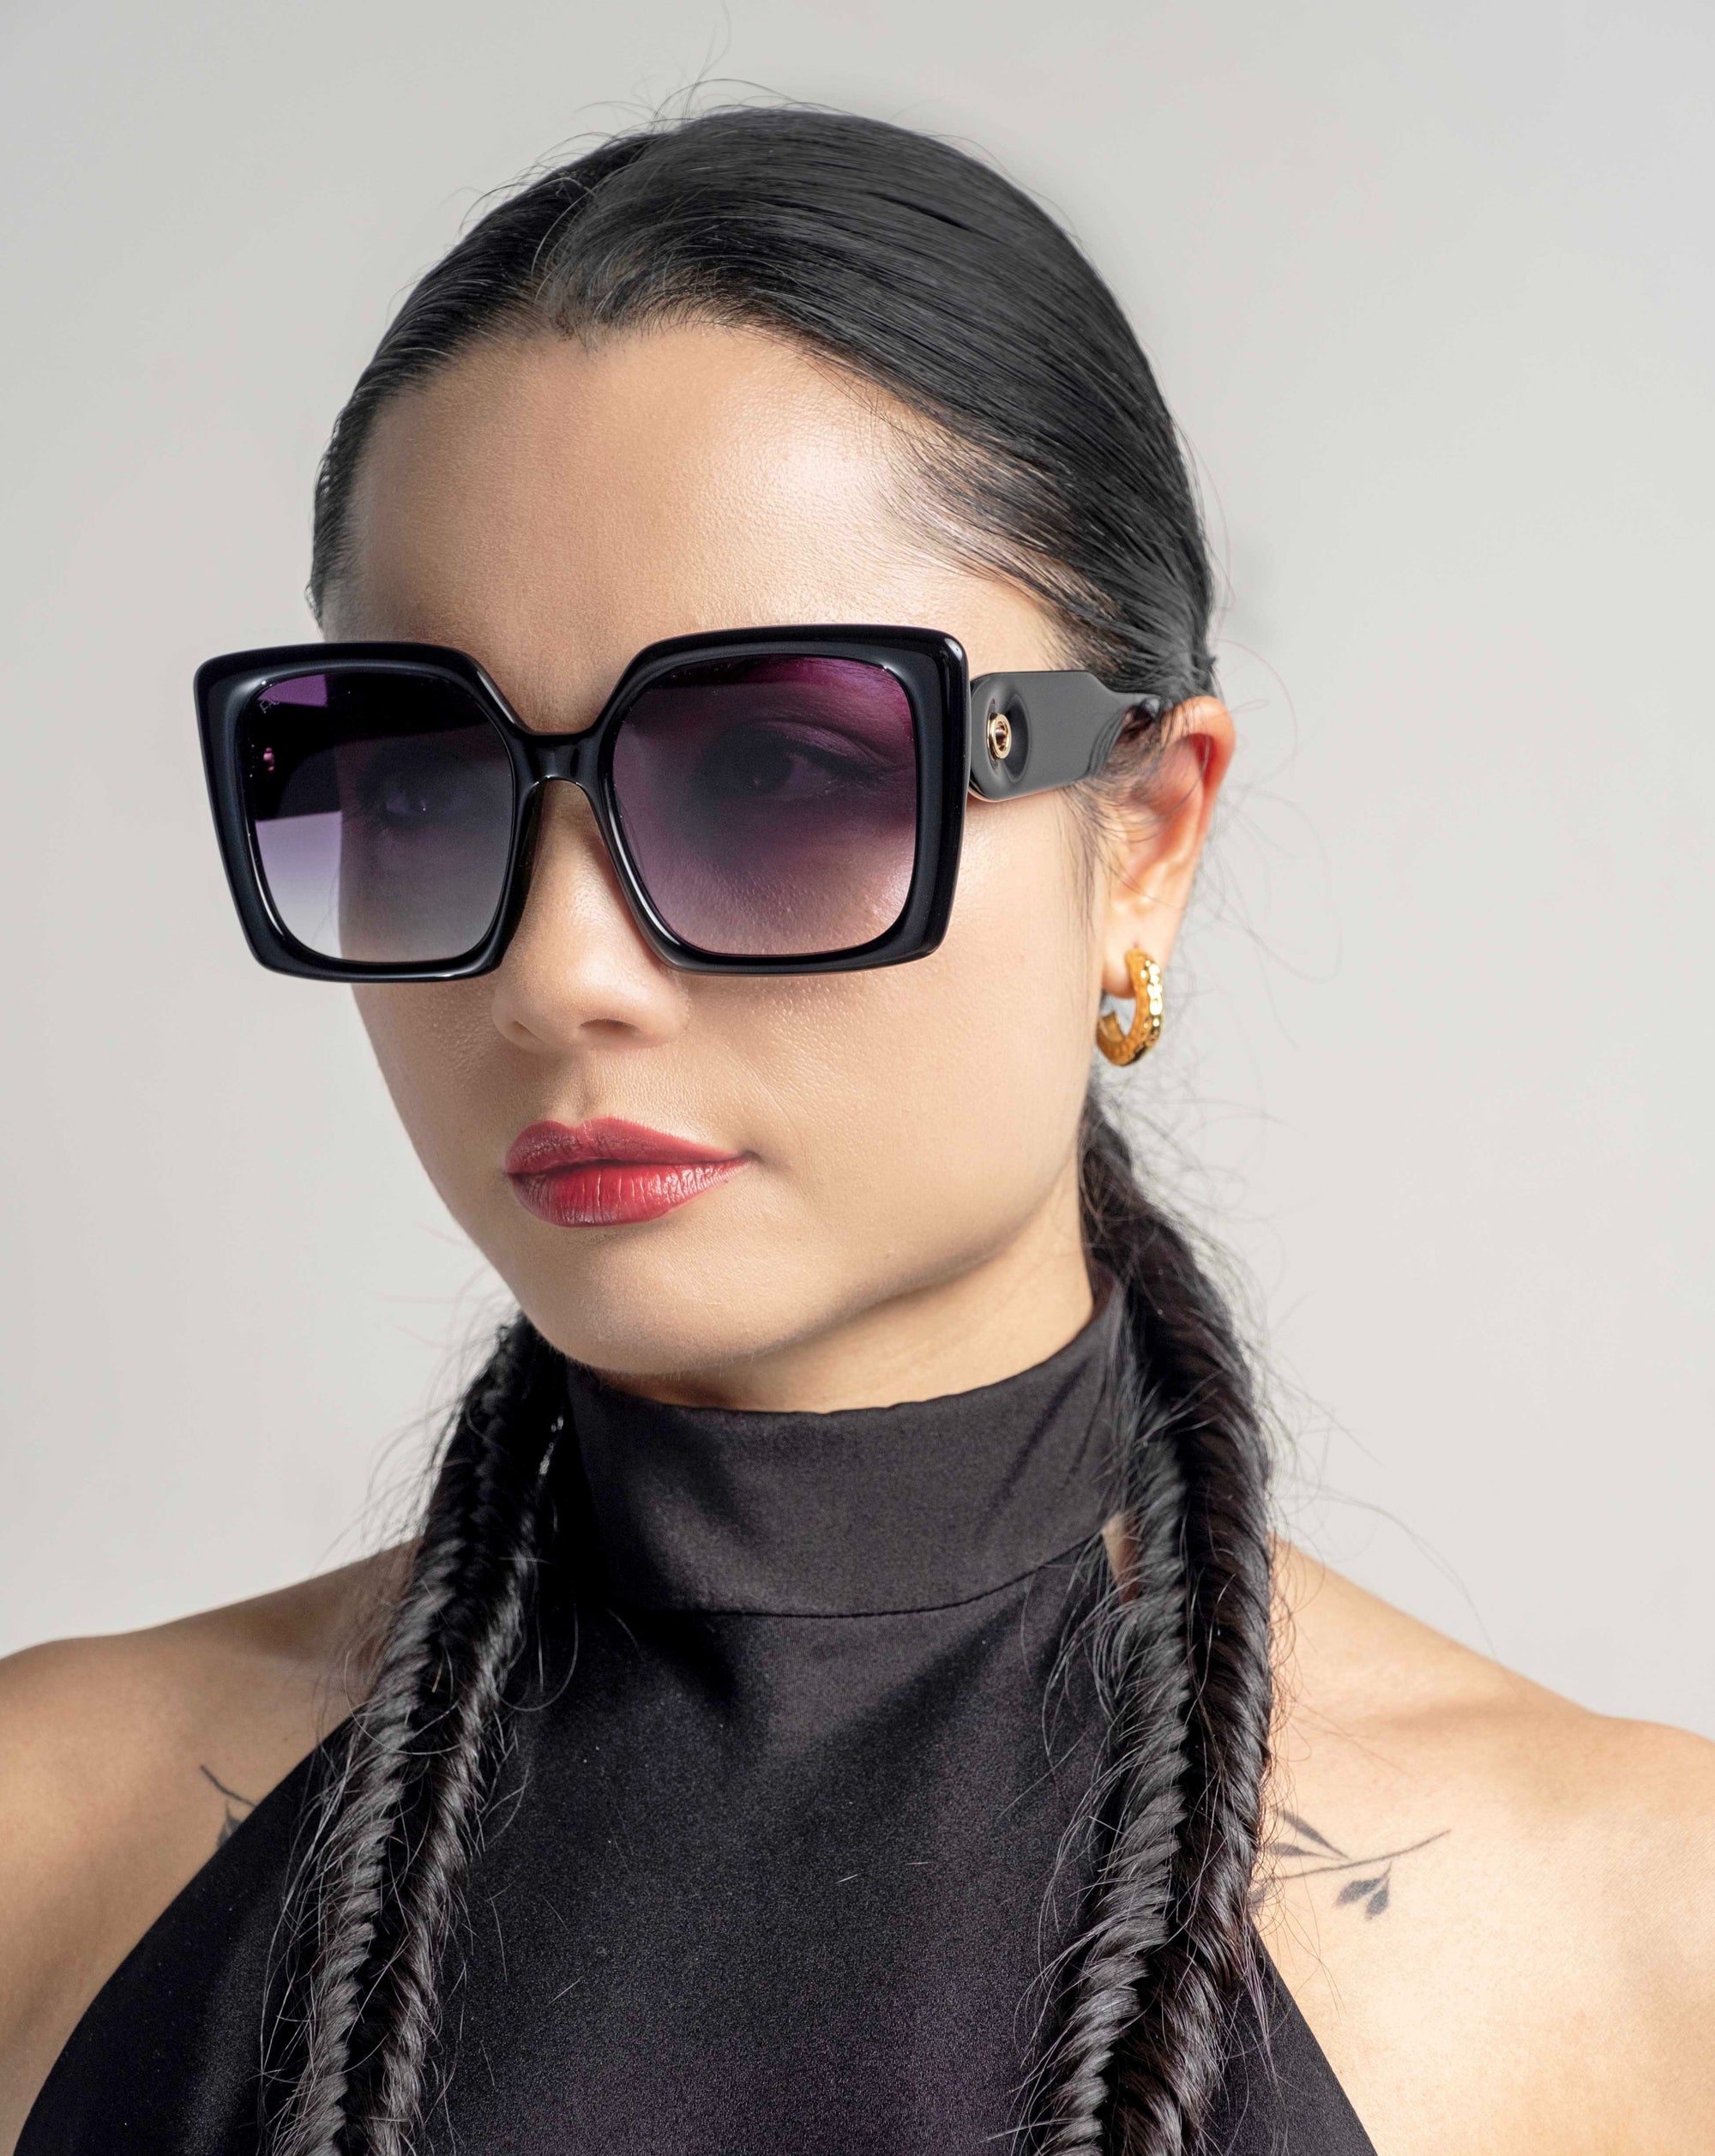 A person with long, dark braided hair is wearing large, square-shaped sunglasses with classic temple round details and a black halter-top. They have a pair of hoop earrings and an 18 karat gold plating accent, all while sporting a contemplative expression, looking slightly to the side against a plain, light-colored background. They are also wearing Eos by For Art&#39;s Sake®.